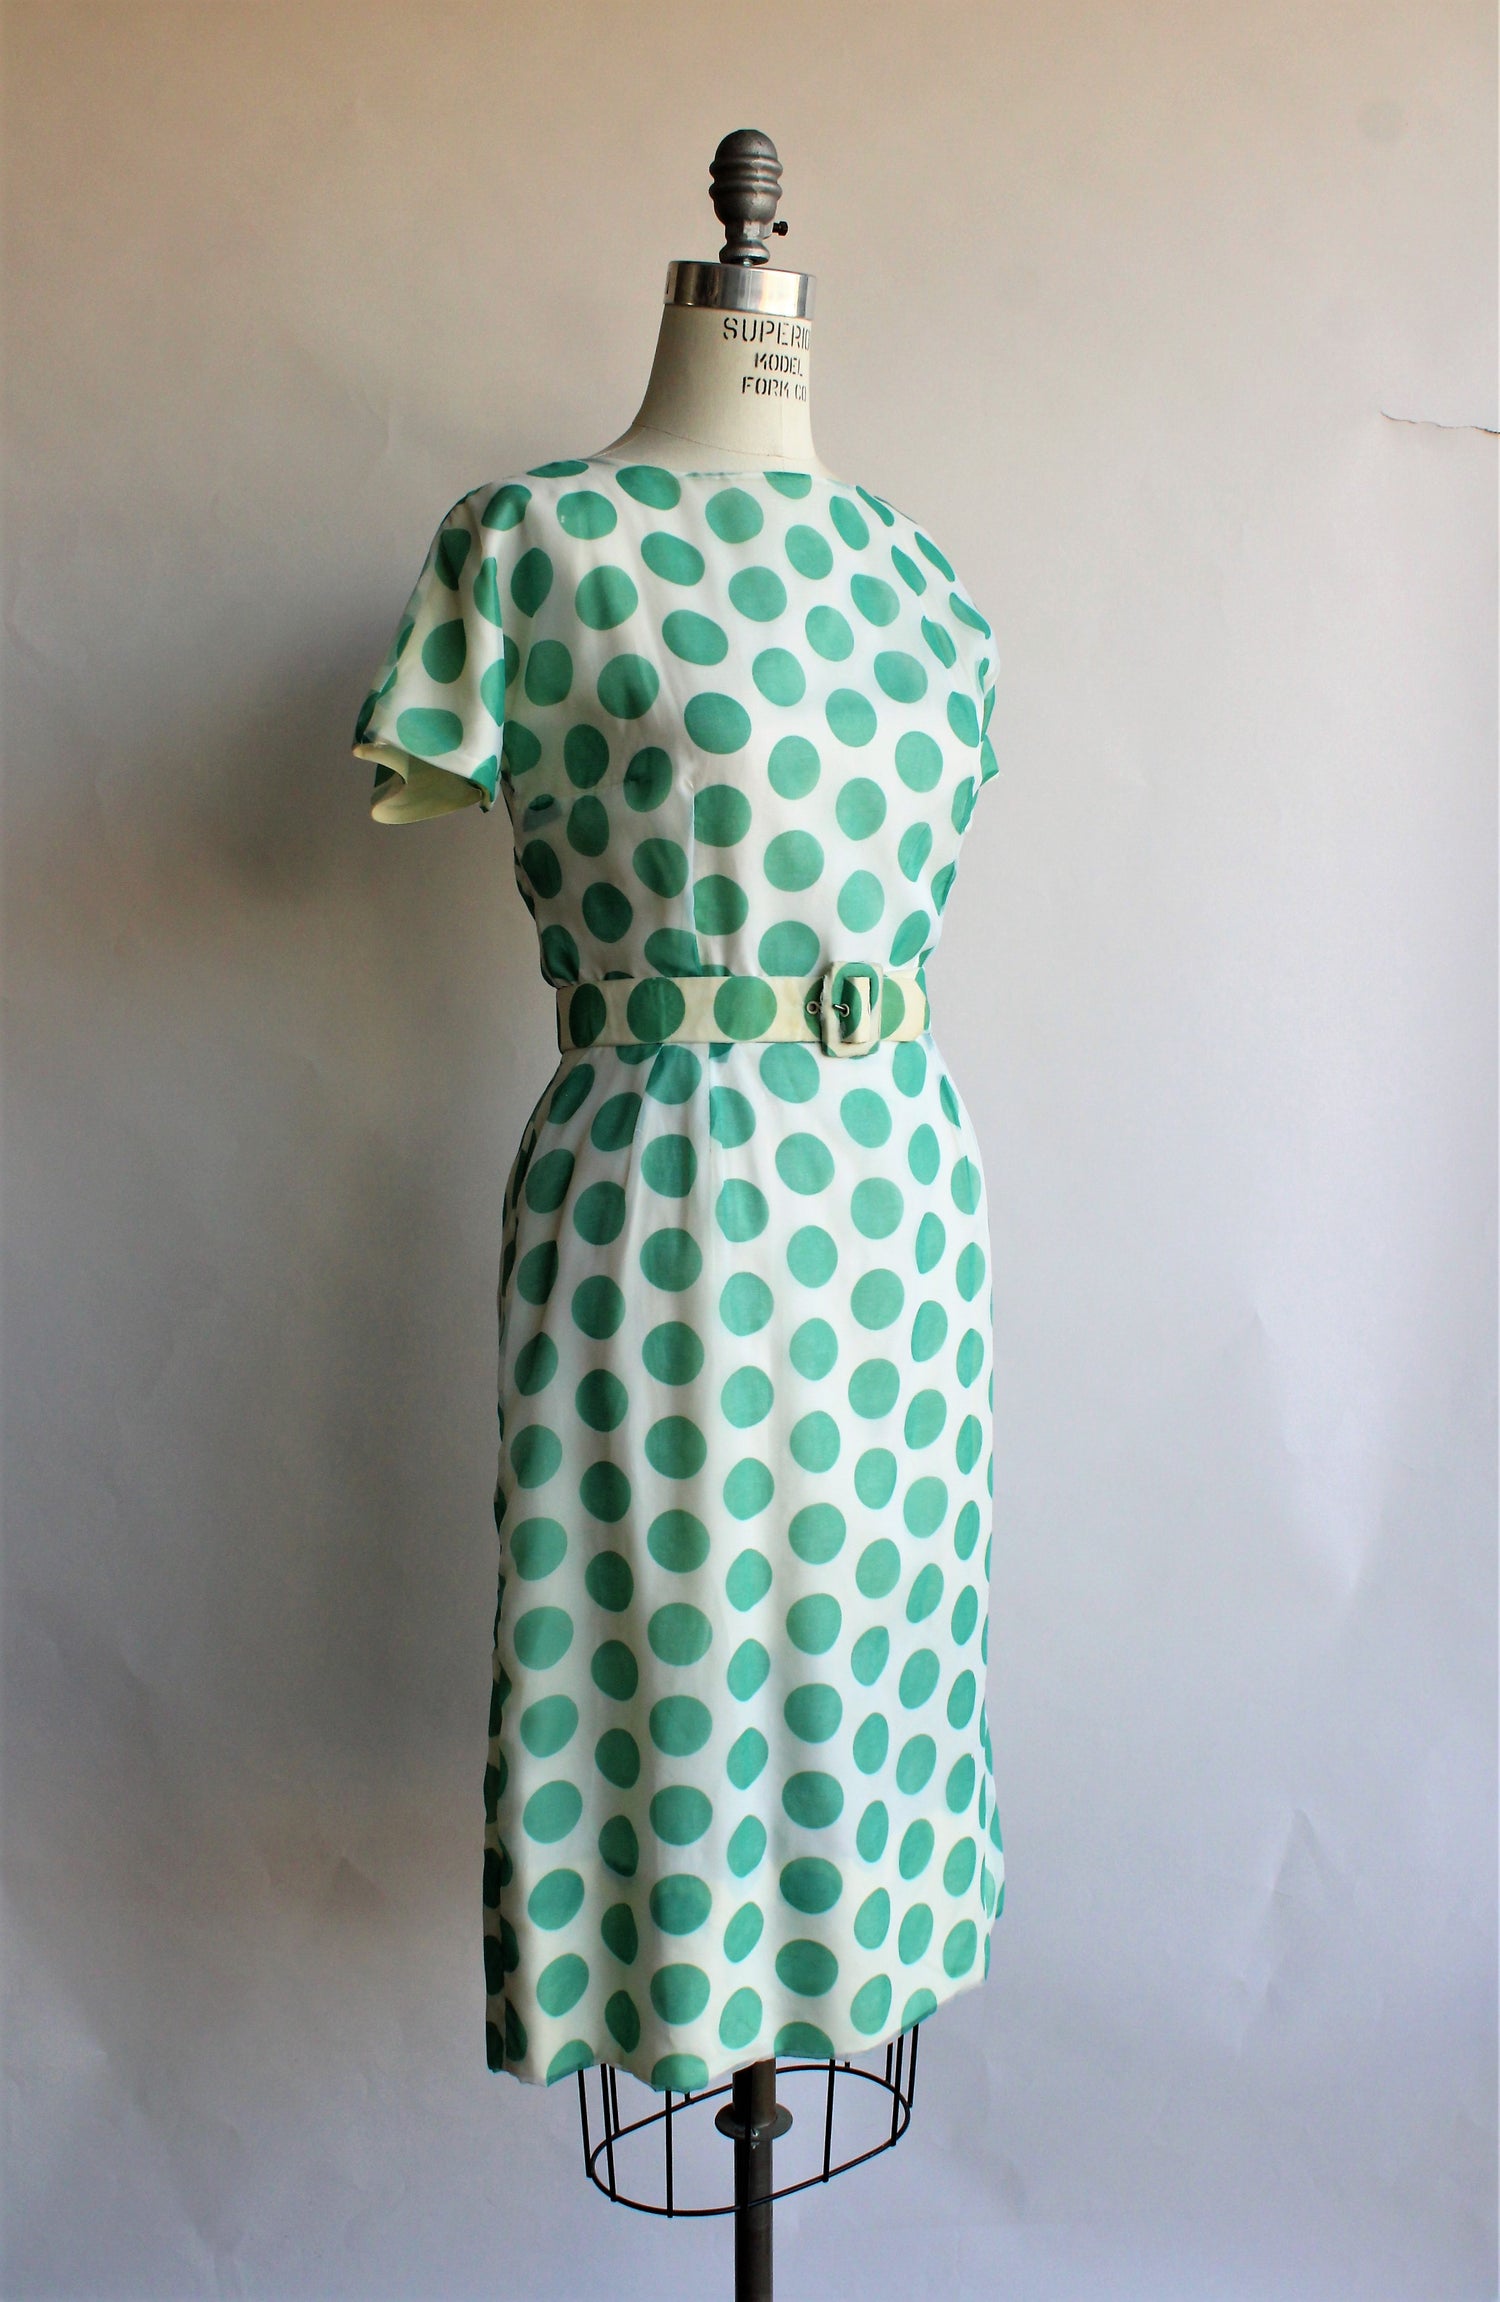 Vintage Late 1950s, Early 1960s Green Polka Dot Dress